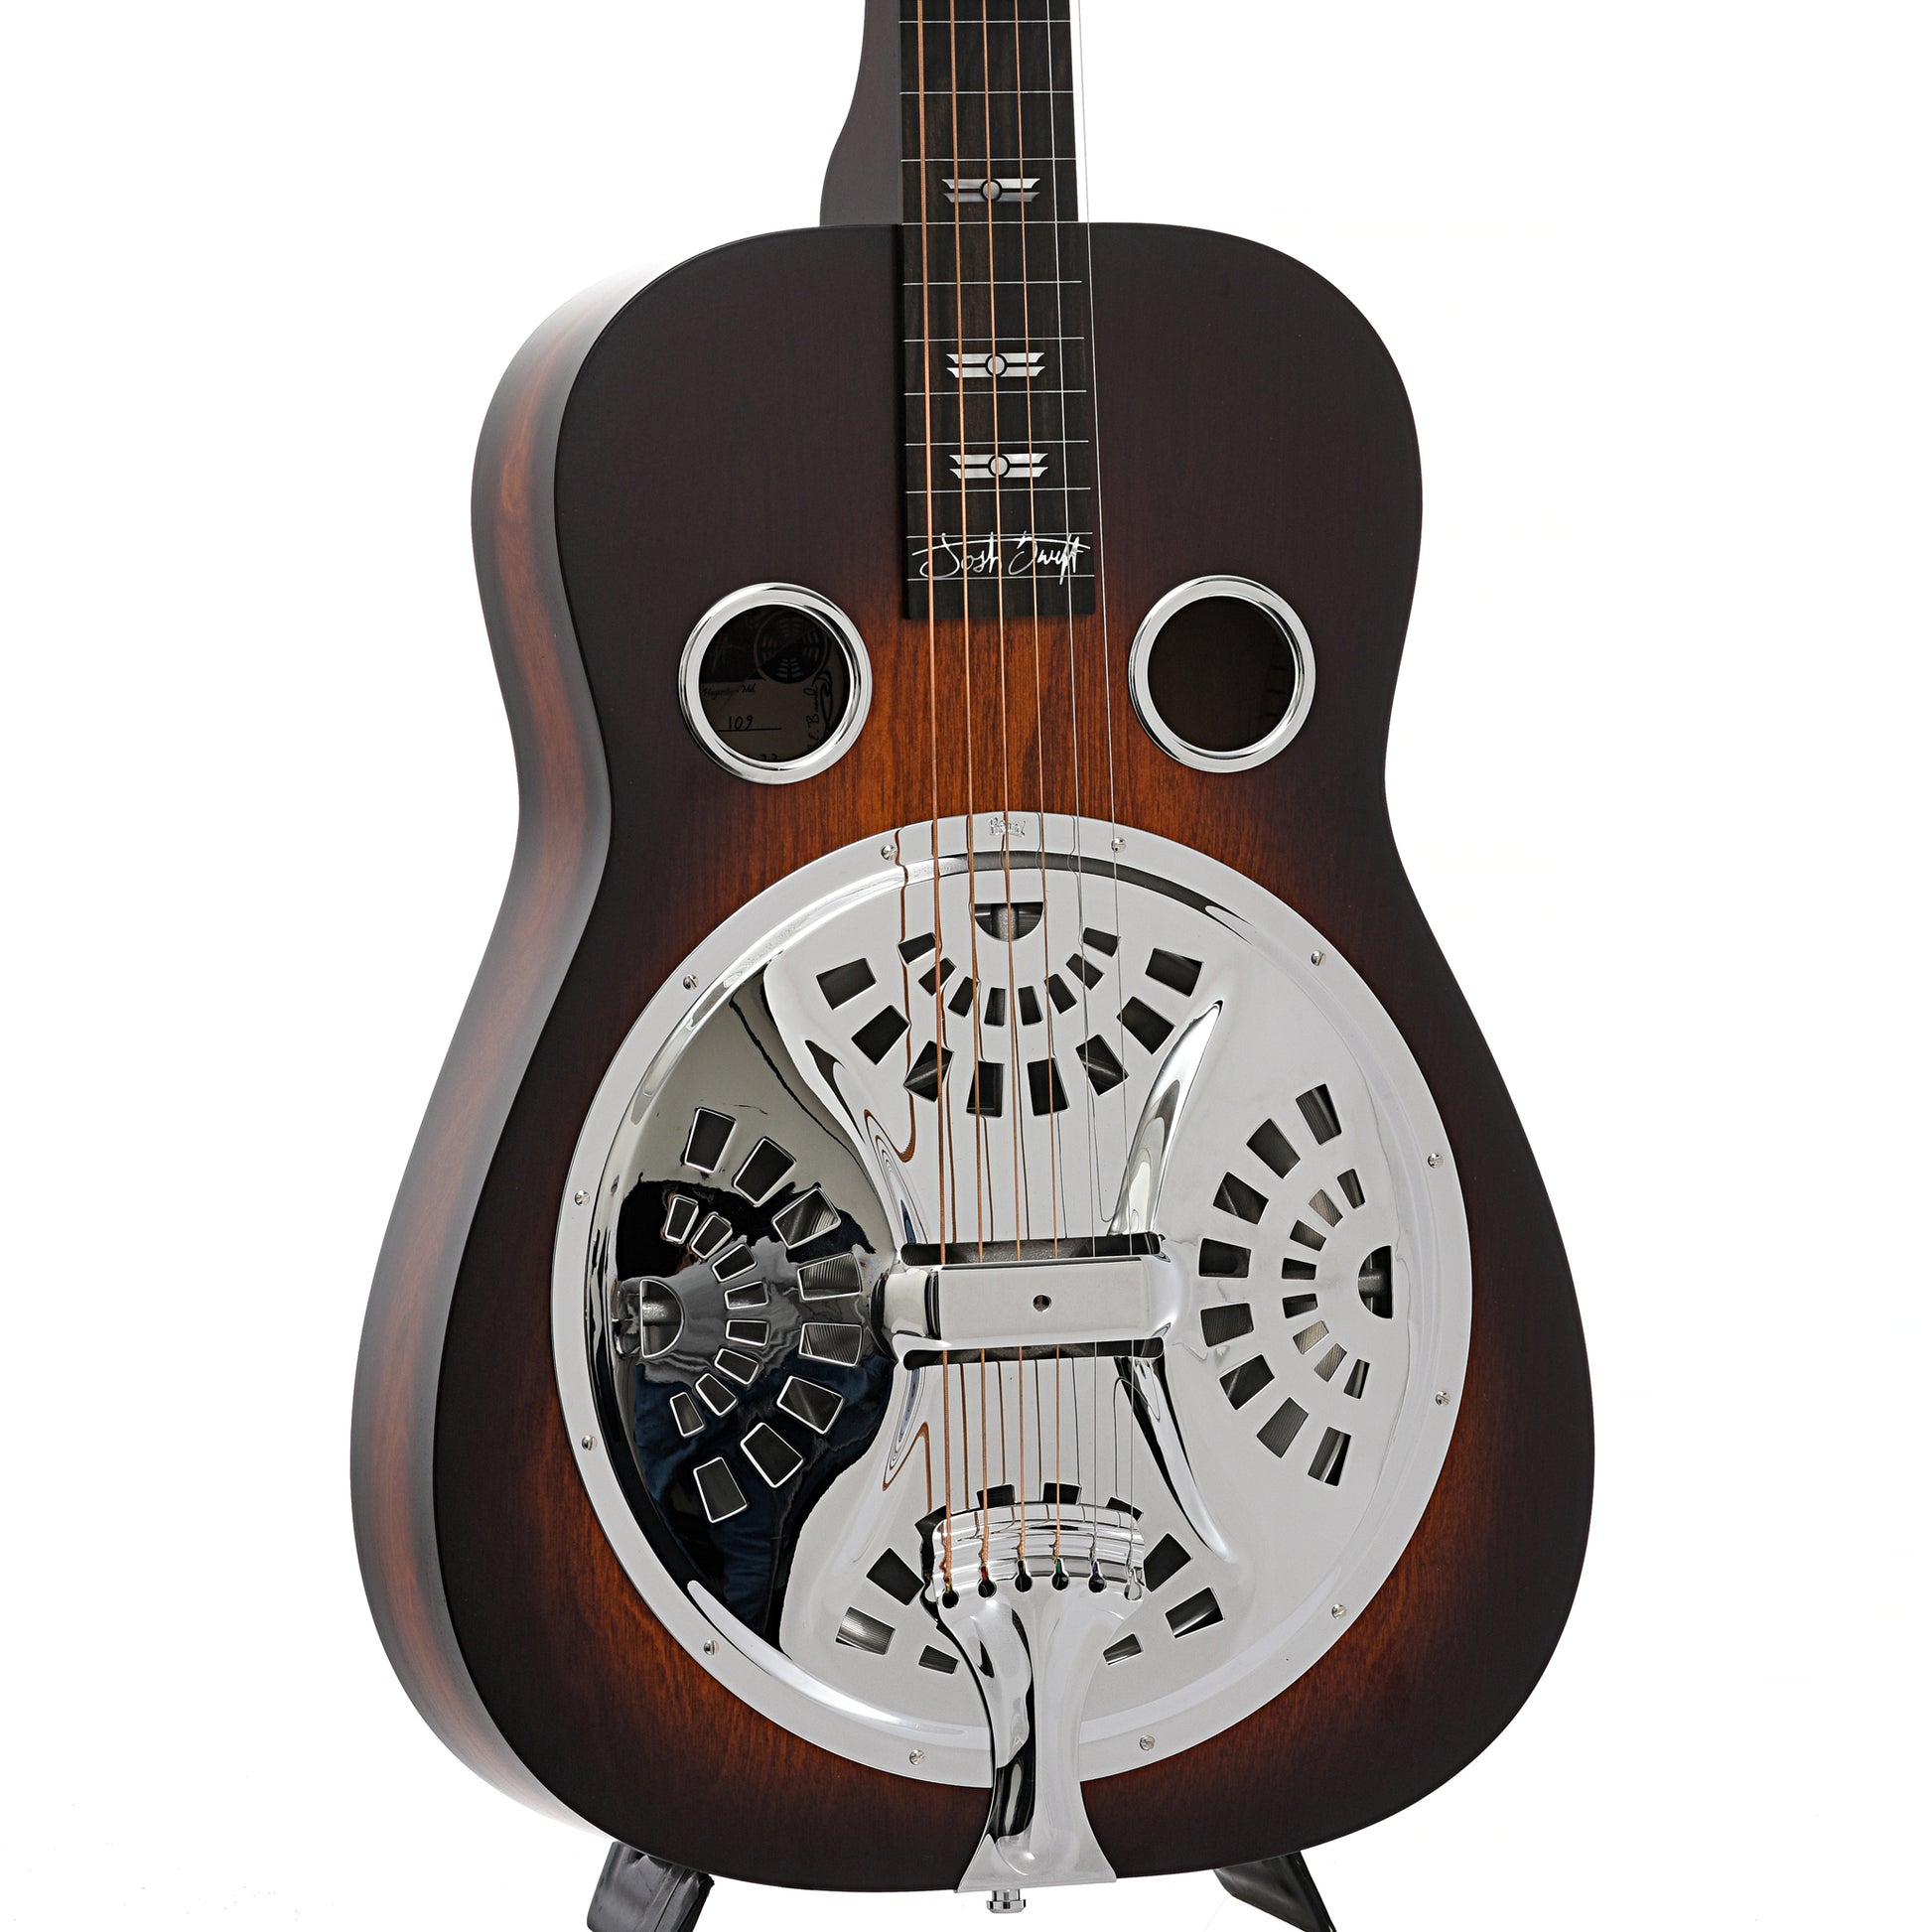 Front and side of Beard Josh Swift Standard Squareneck Resonator Guitar with Signature Inlays